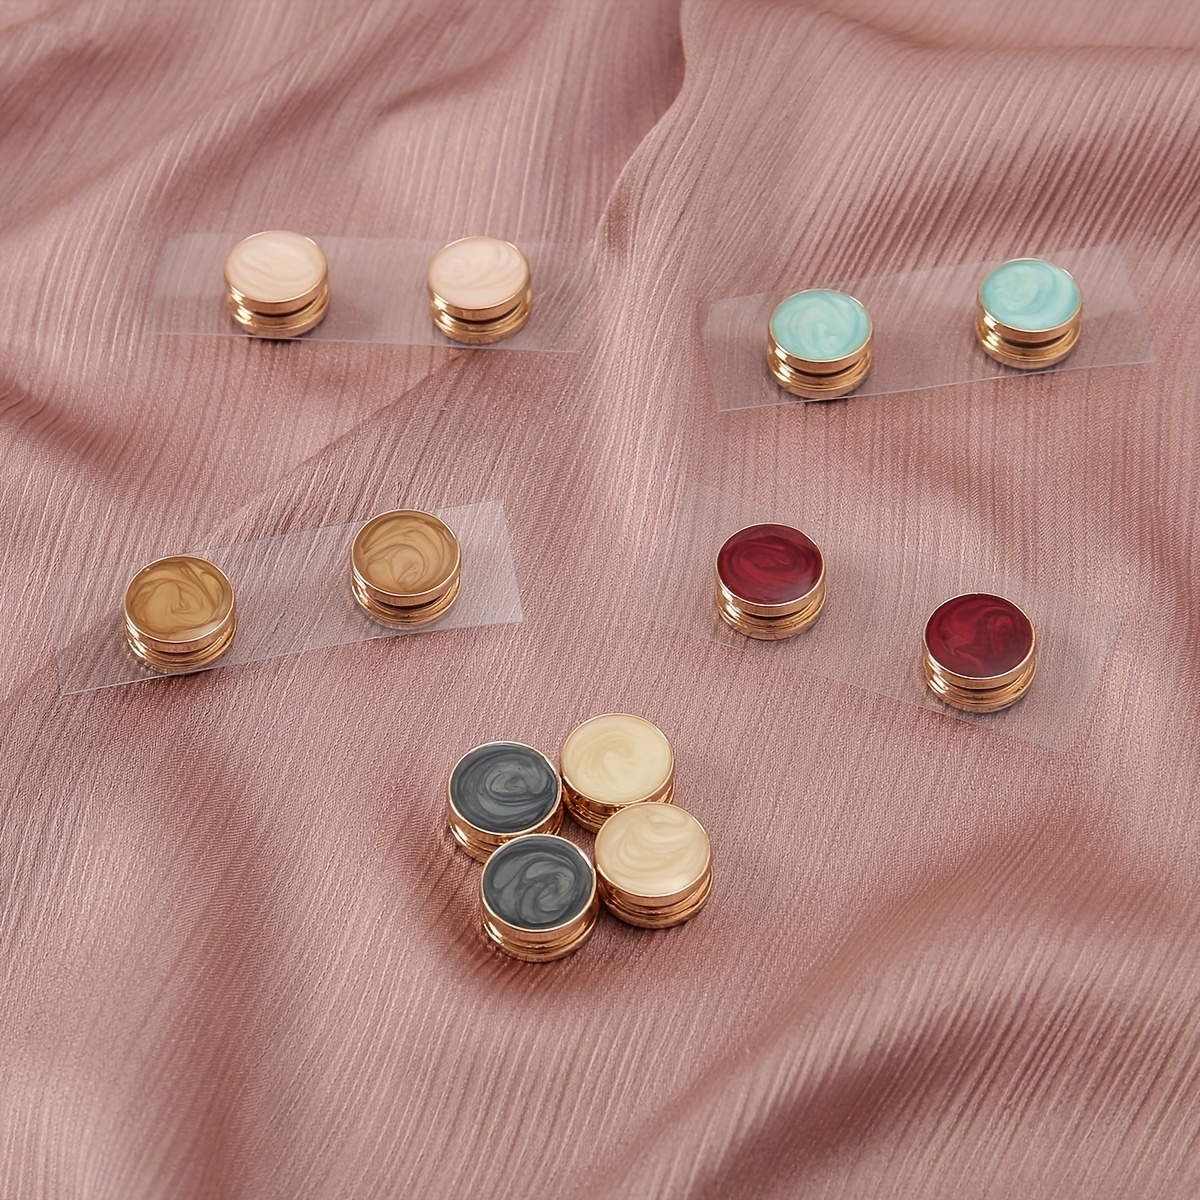 8 Pcs Hijab Magnetic Pins,strength Magnetic Hijab Pins Buttons For Women  Multi-use Colorful Scarf Small Magnetic Hijab